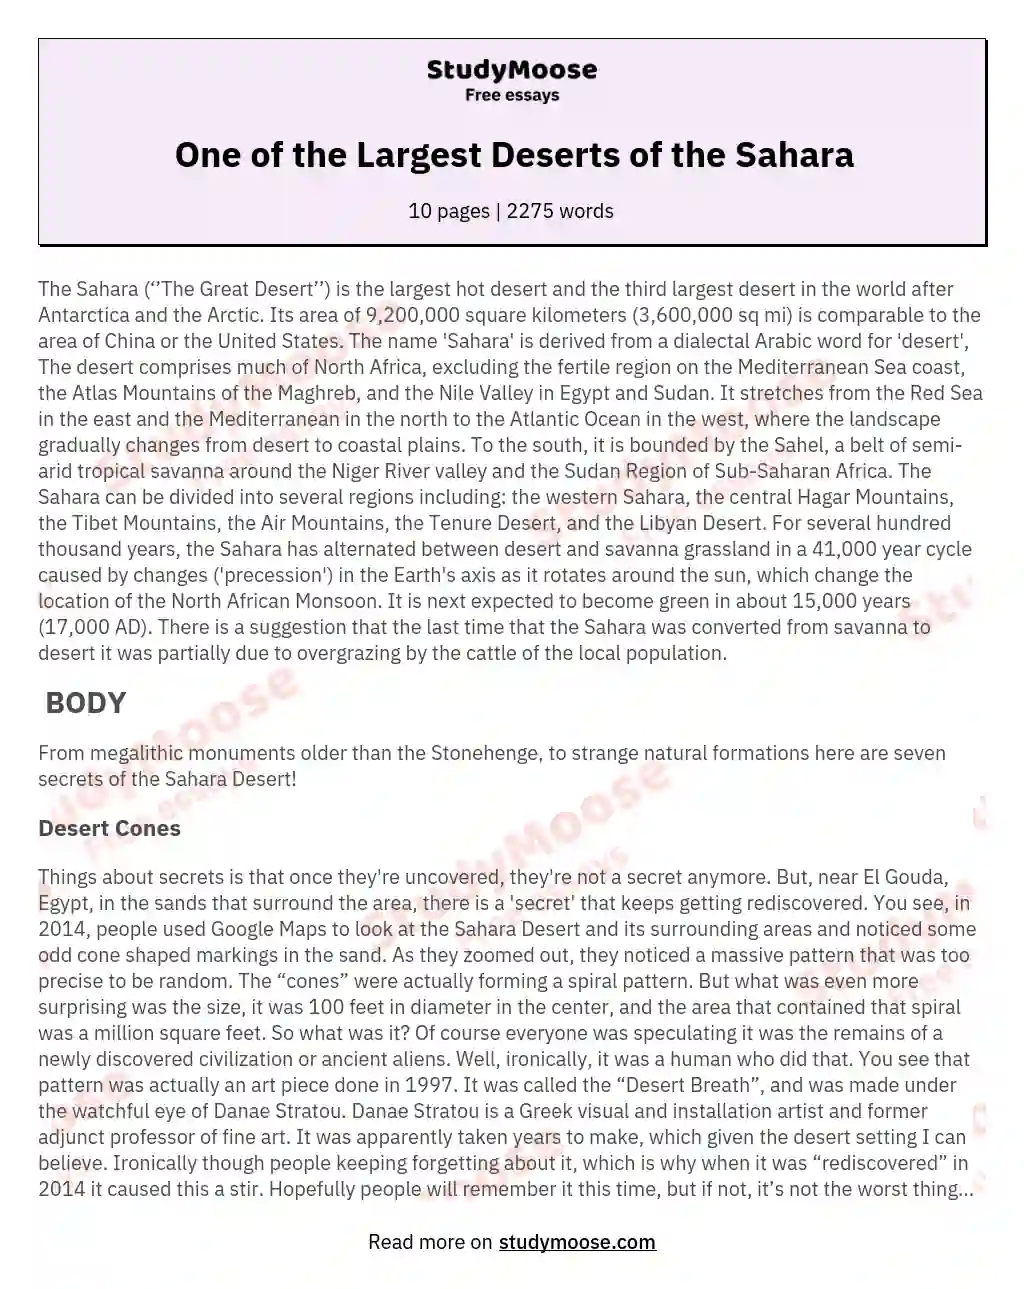 One of the Largest Deserts of the Sahara essay